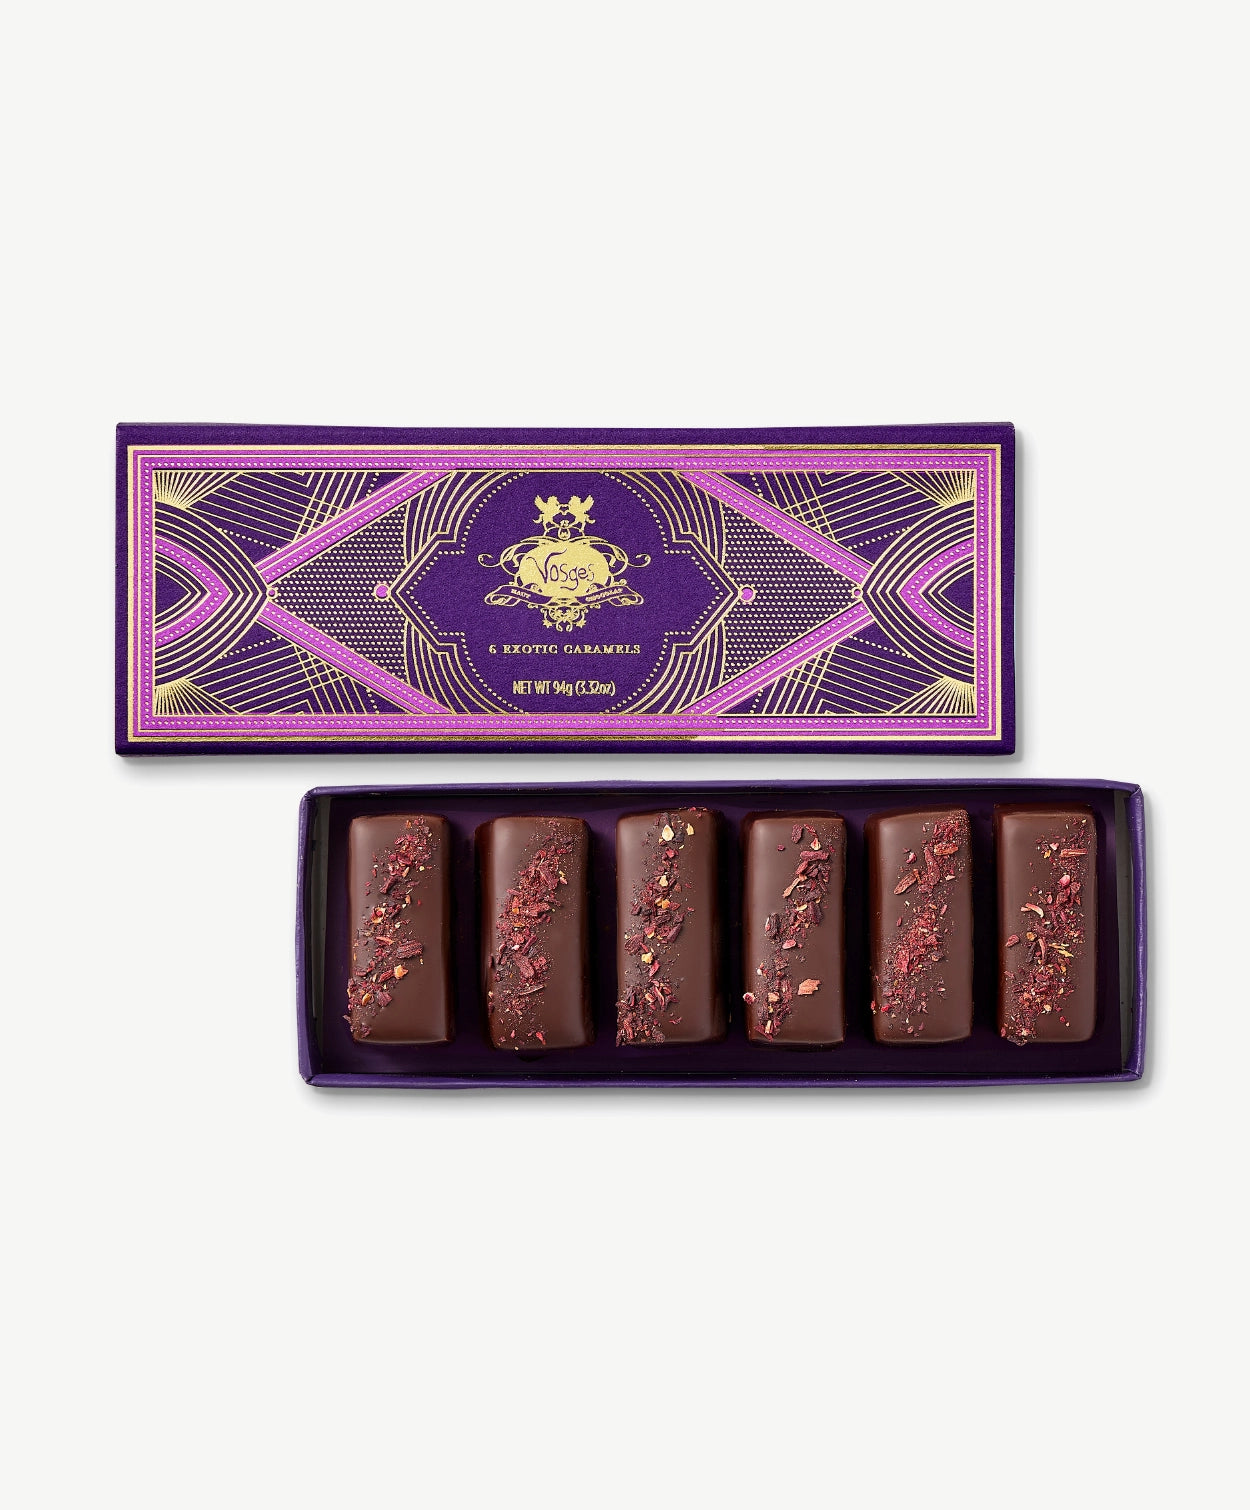 Six chocolate covered Vosges Caramels topped with hibiscus flowers in opened candy box embossed with gold foil on a grey background.